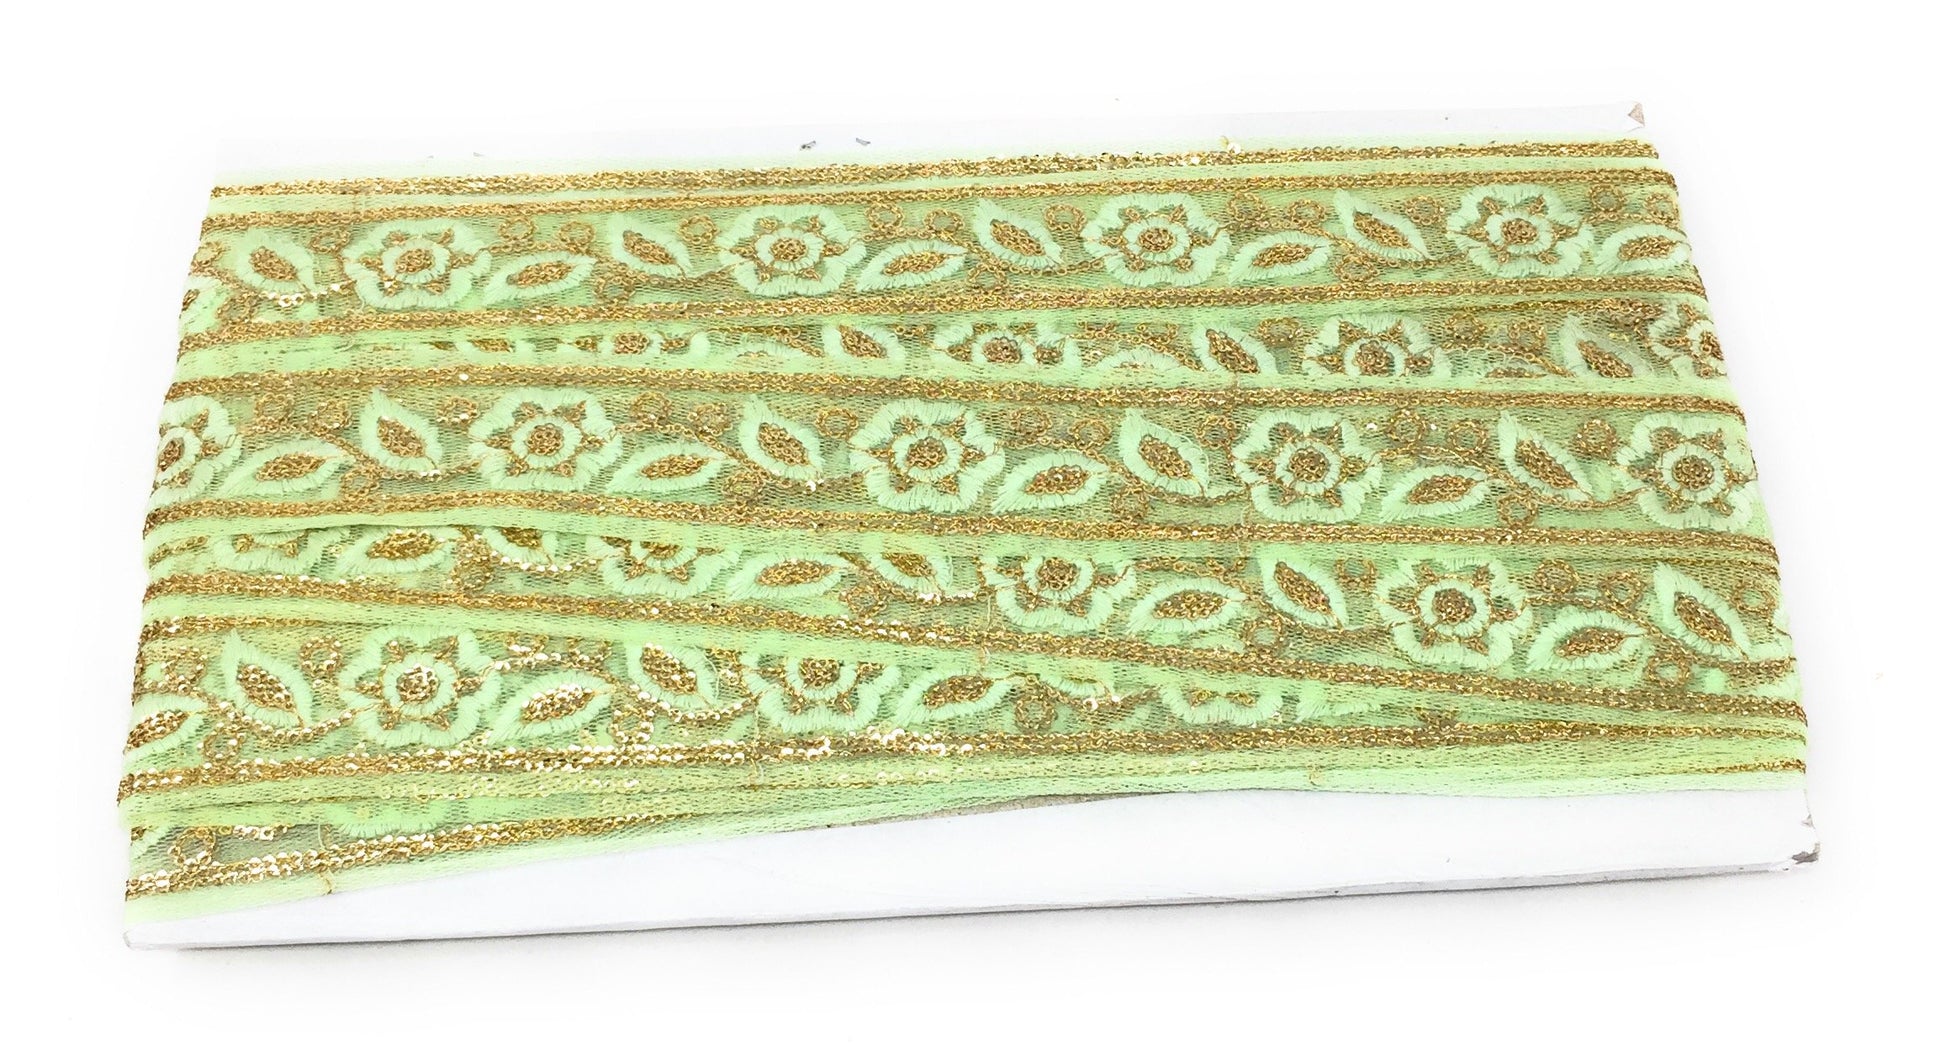 Pastel Green Sequins Embroidery Saree Border Trim - 9 Meter Roll